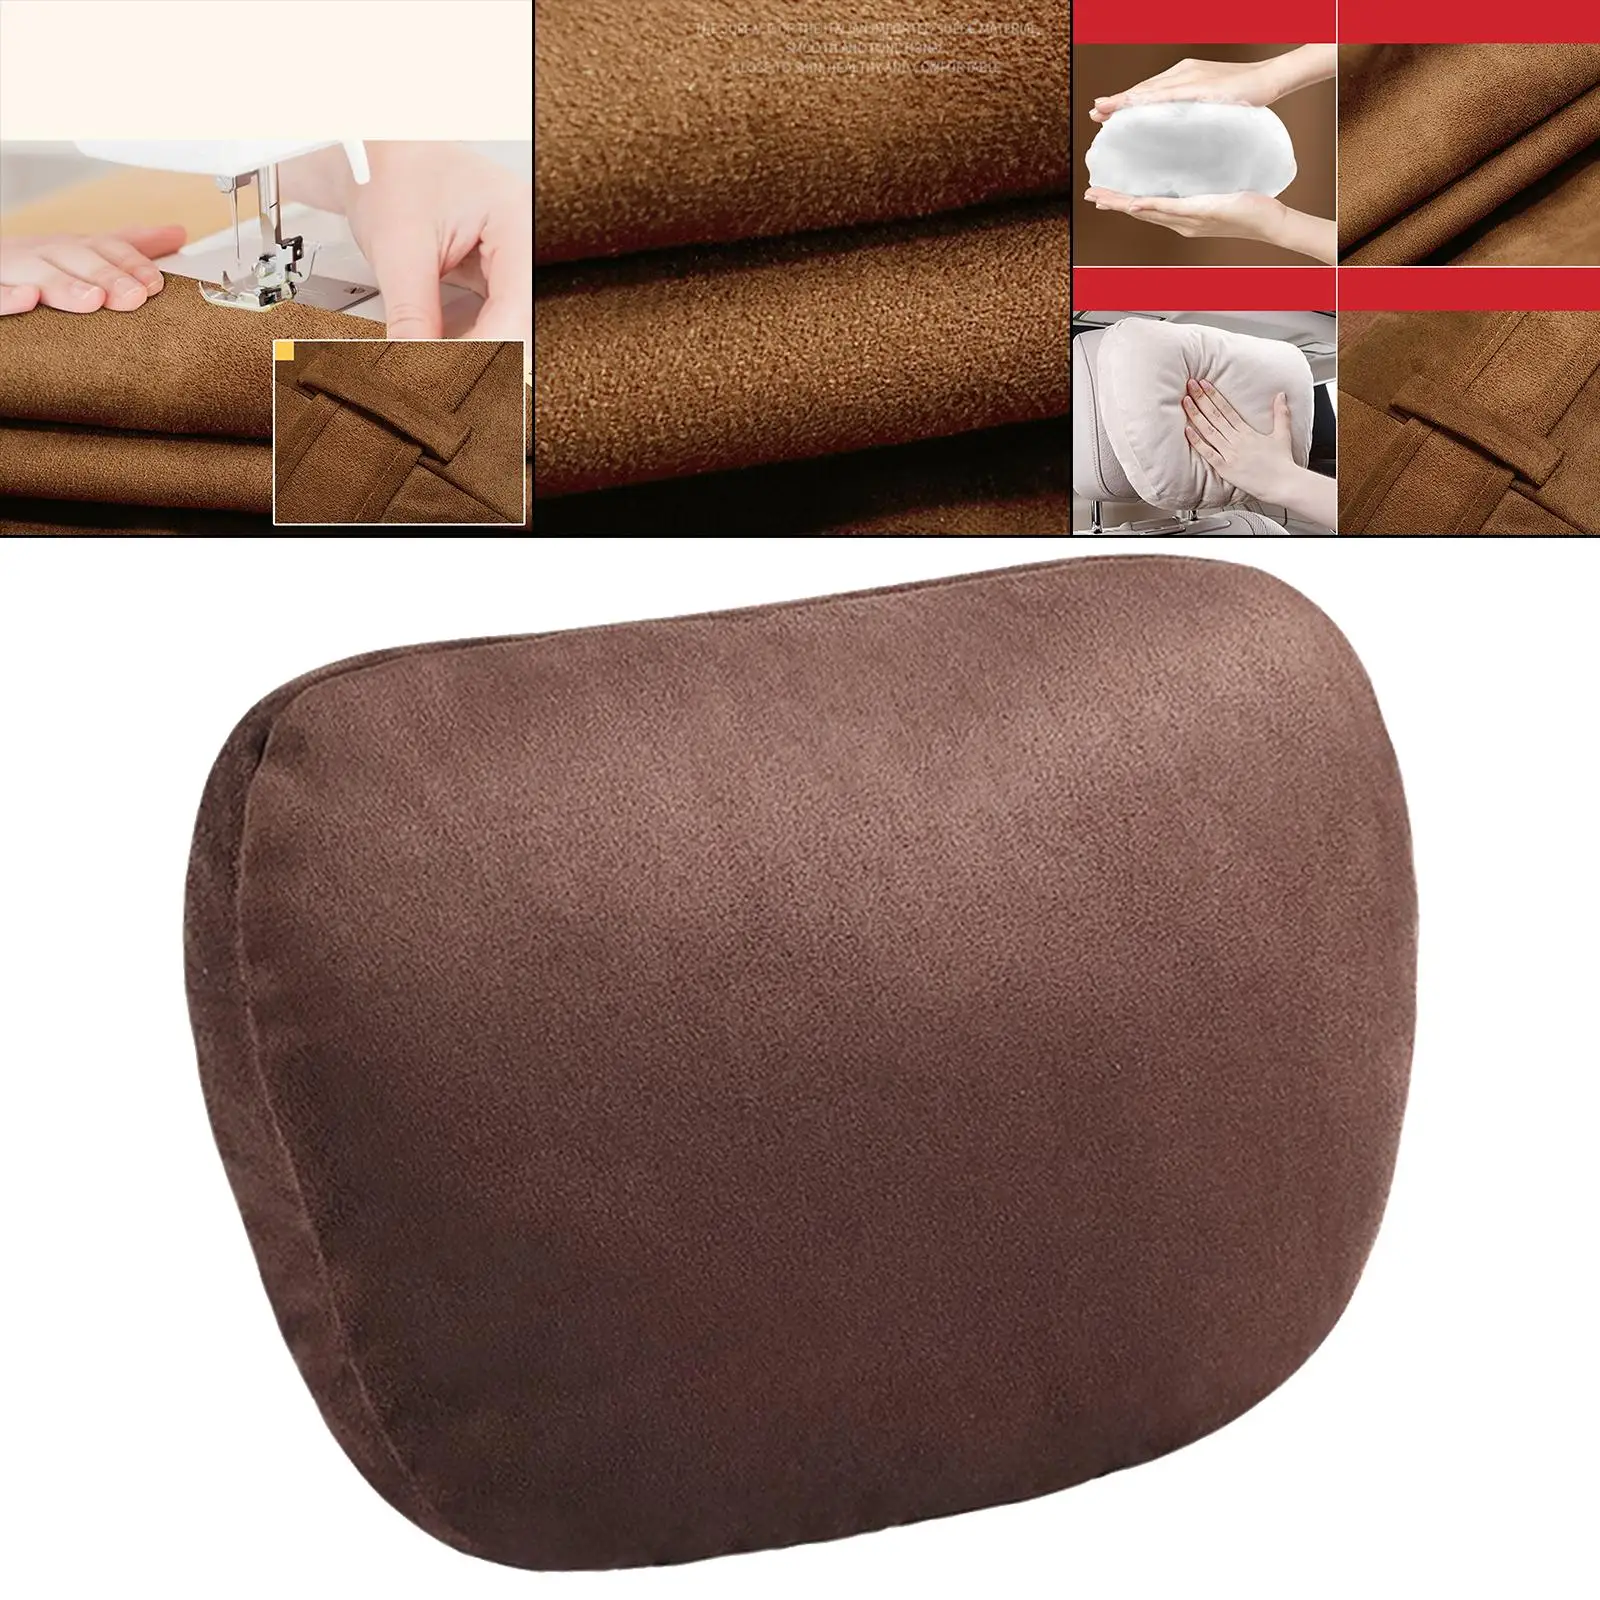 Car Headrest Washable Cover Breathable Neck Support Fit for Driving Office Chair